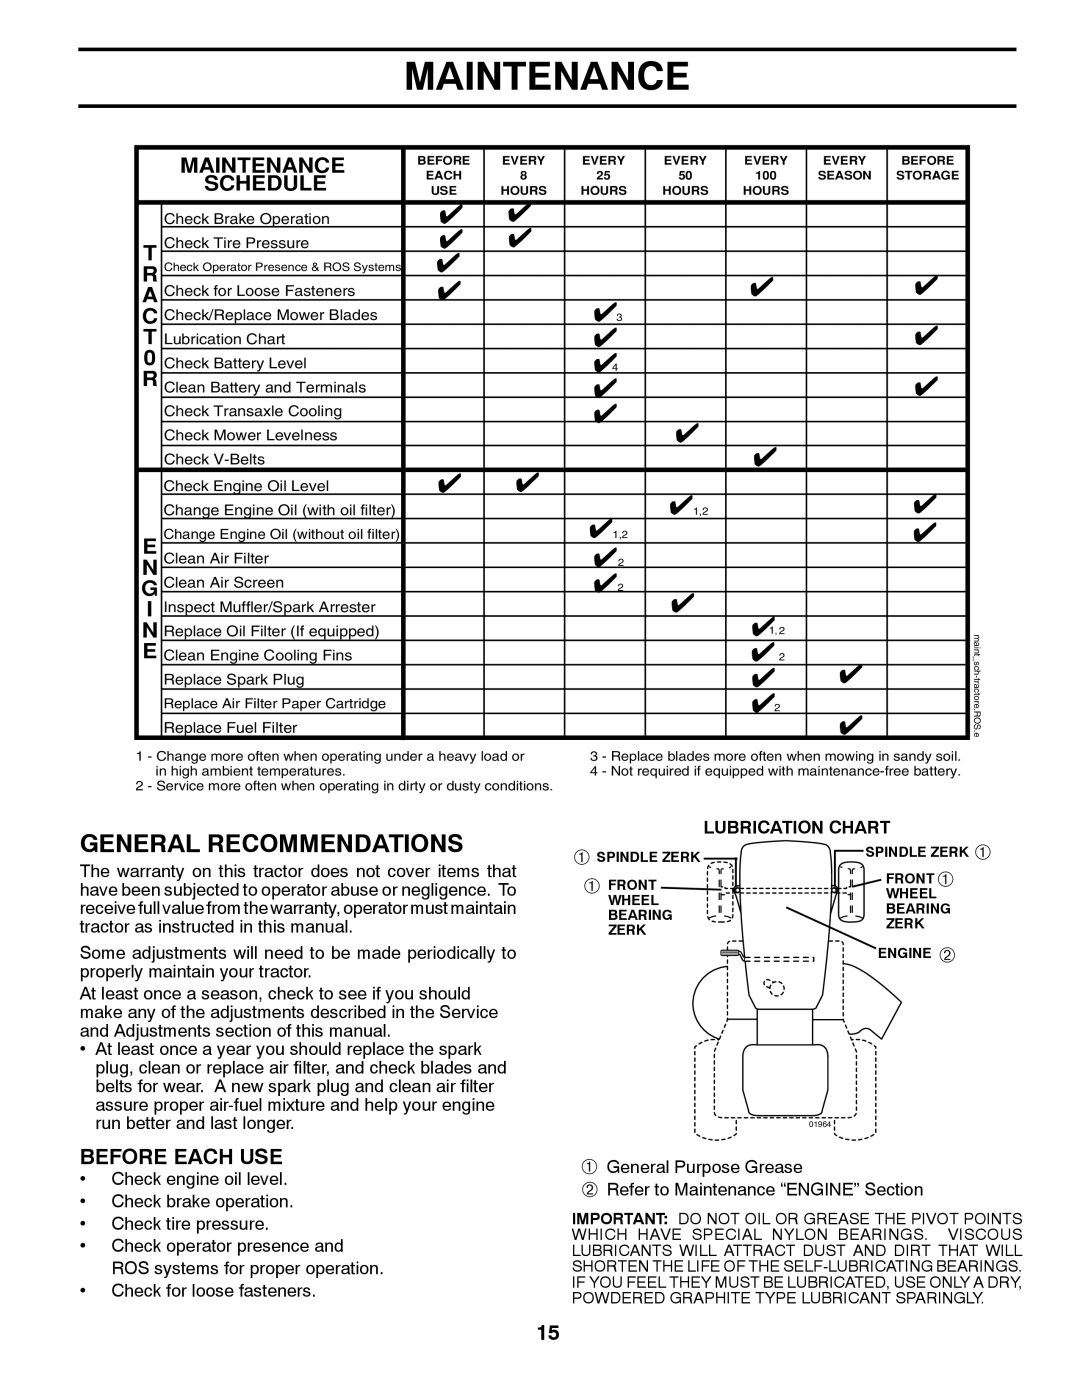 Poulan PB195H42LT manual General Recommendations, Maintenance, Schedule, Before Each USE 